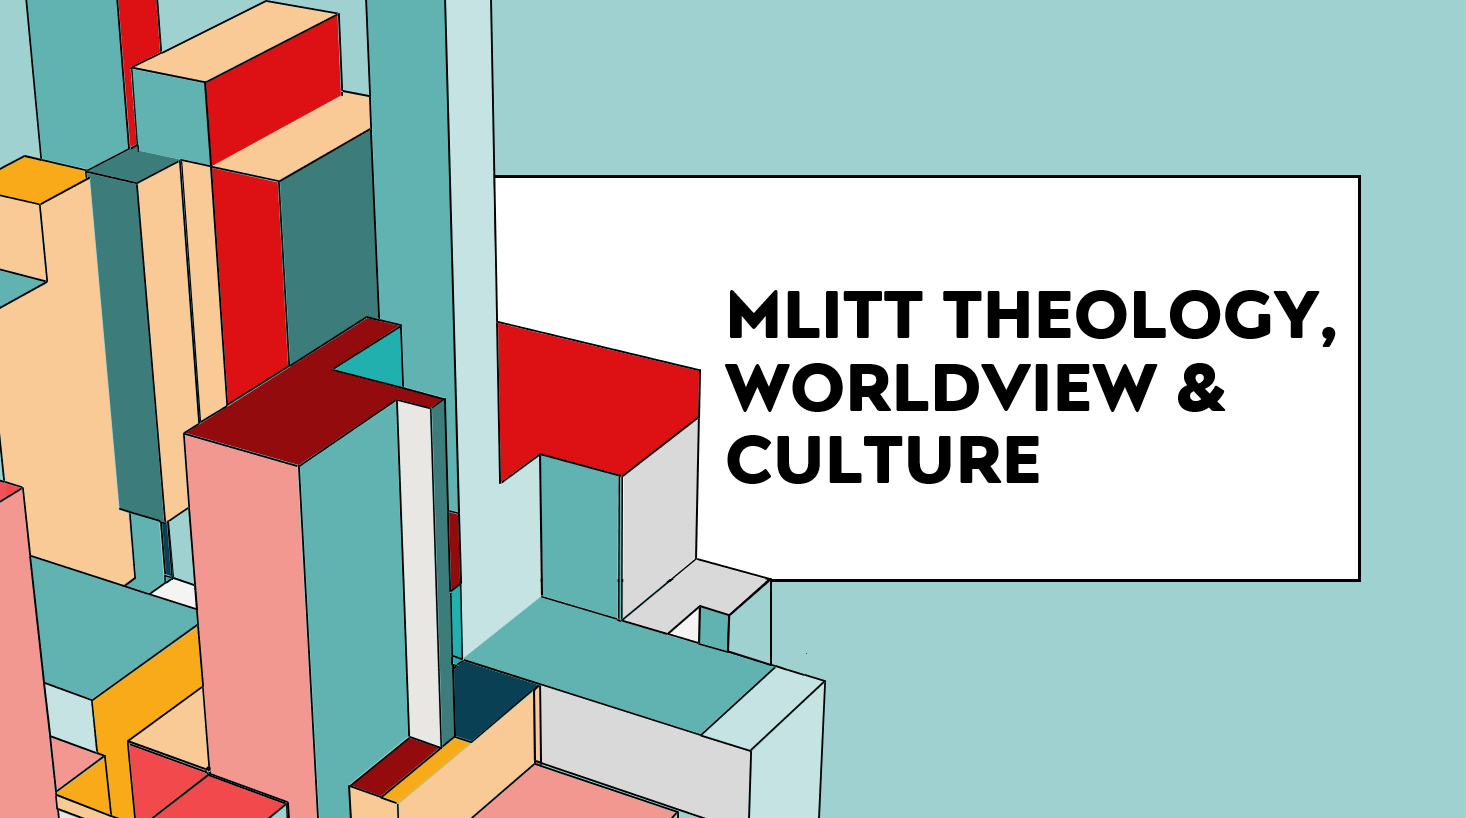 Introducing our MLitt Theology, Worldview, and Culture